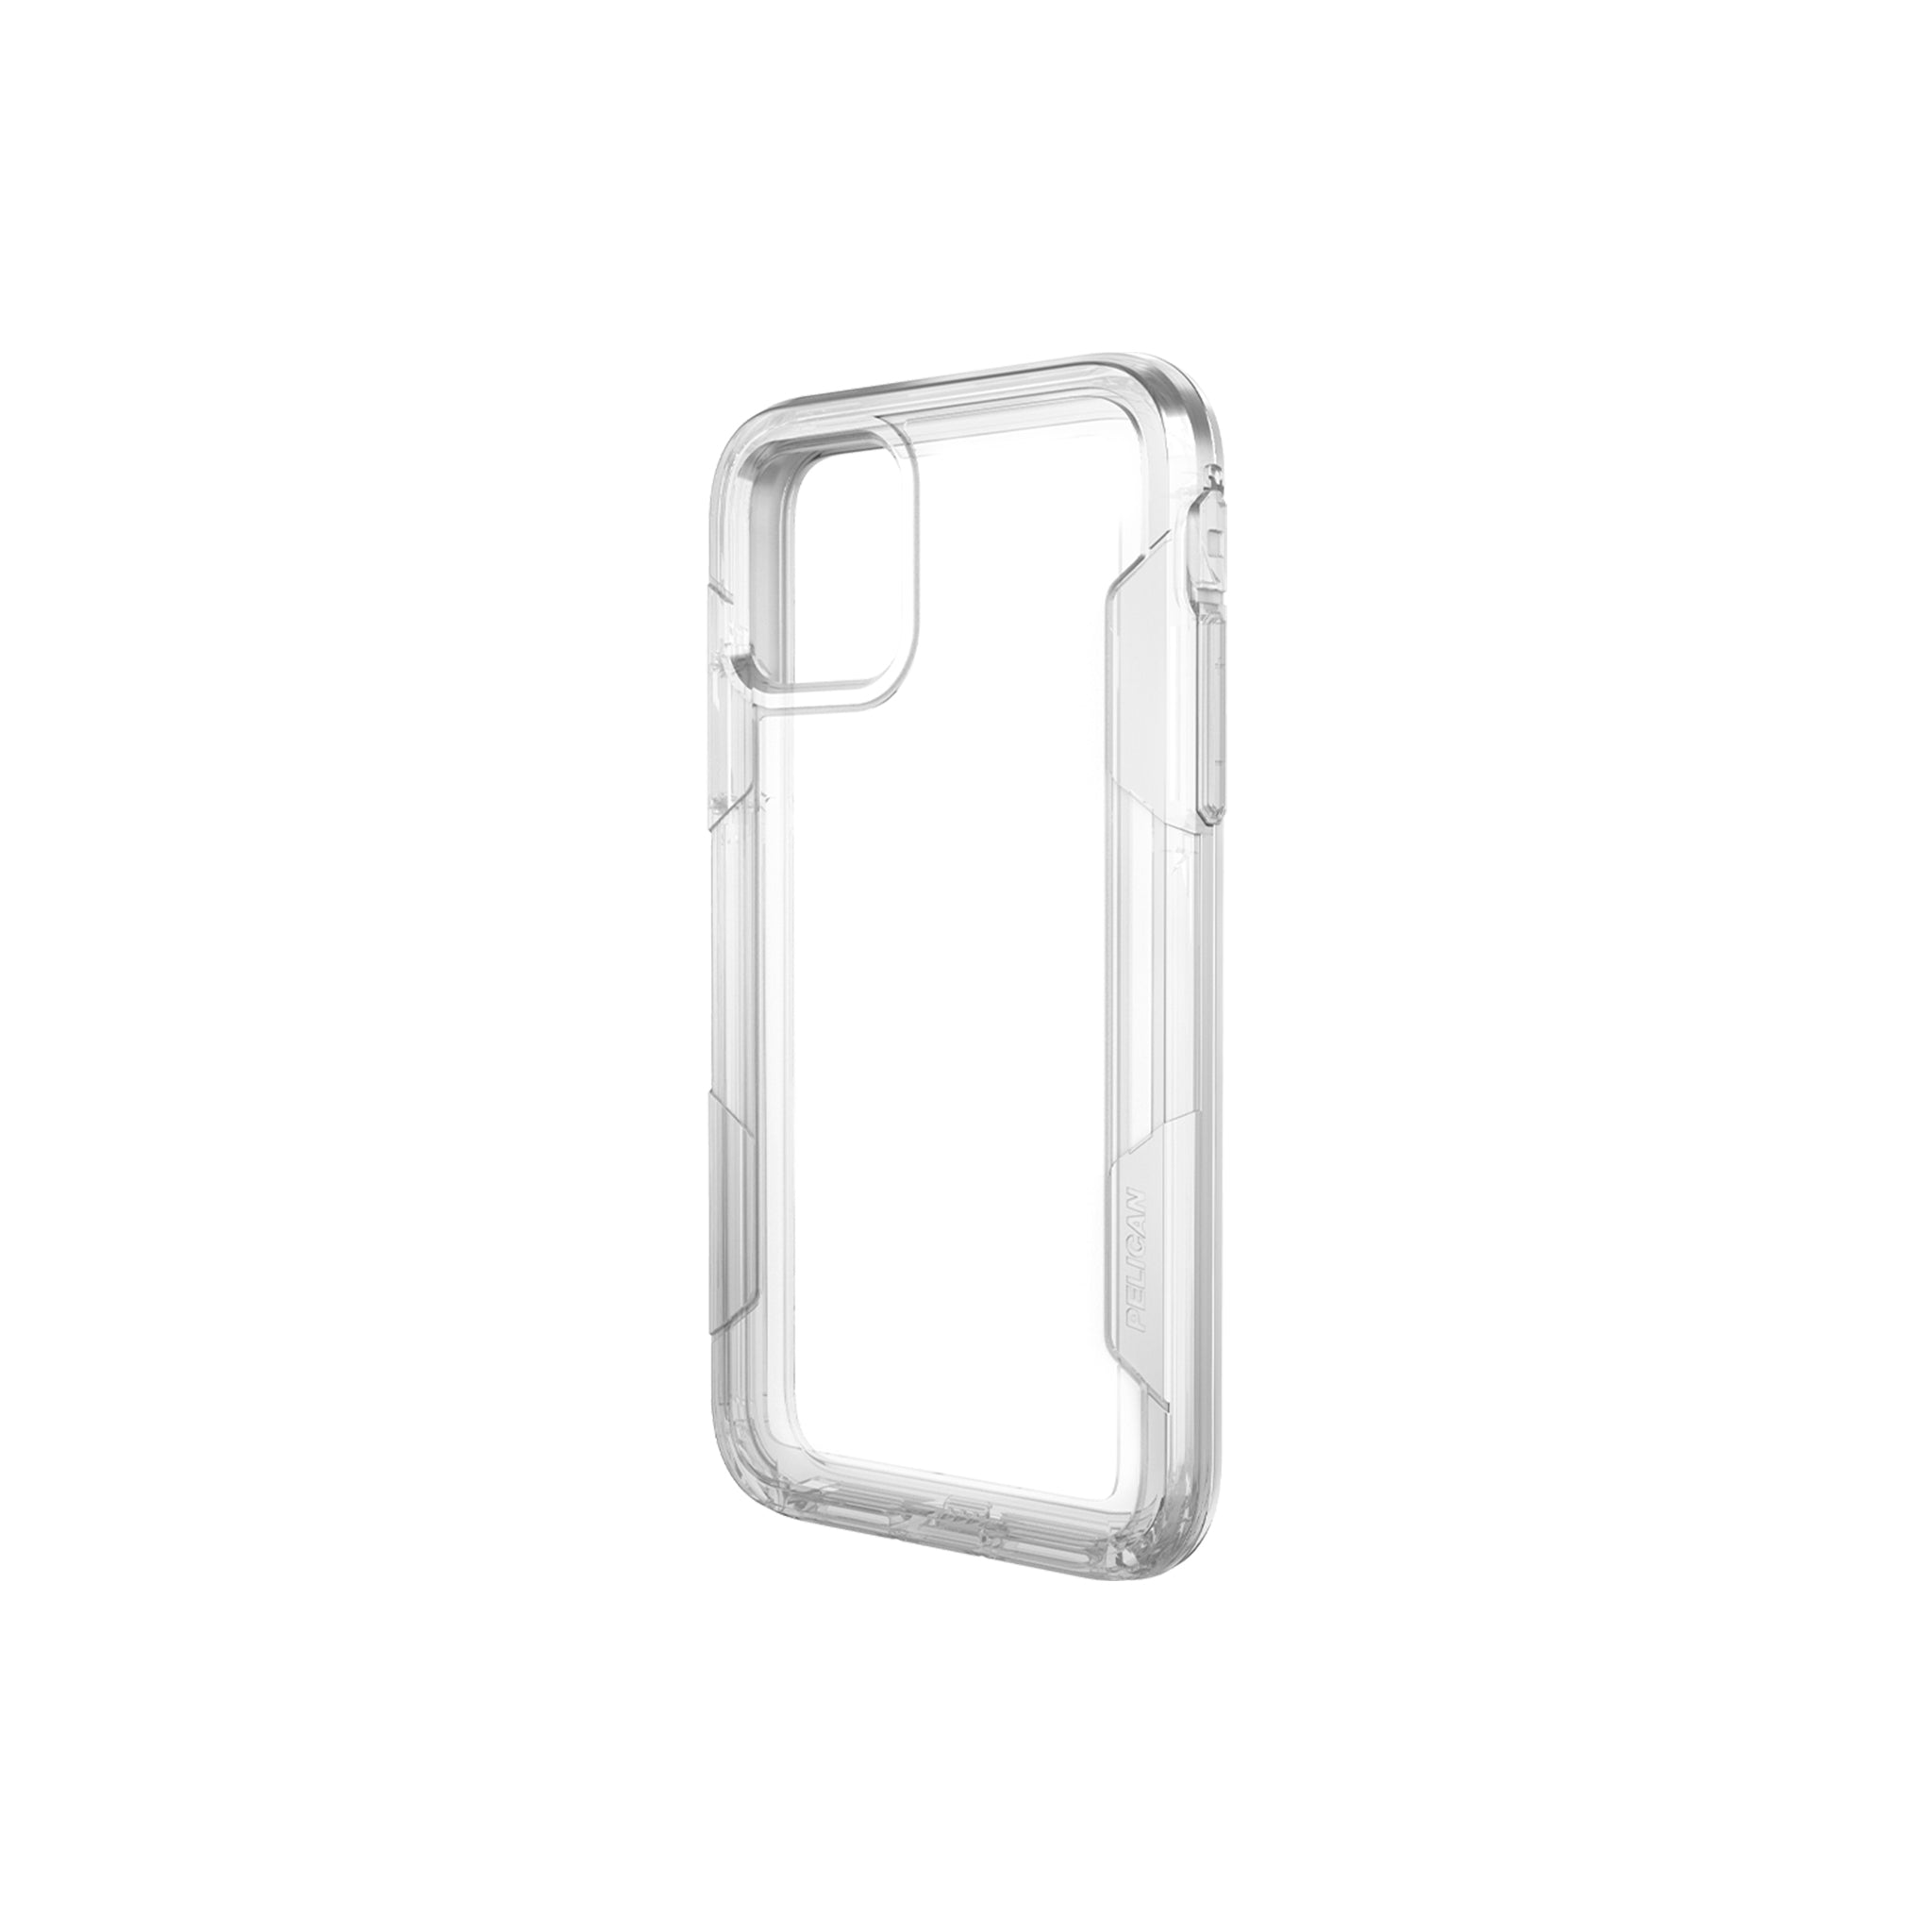 Pelican - Voyager Case For Apple iPhone 11 Pro Max / Xs Max - Clear